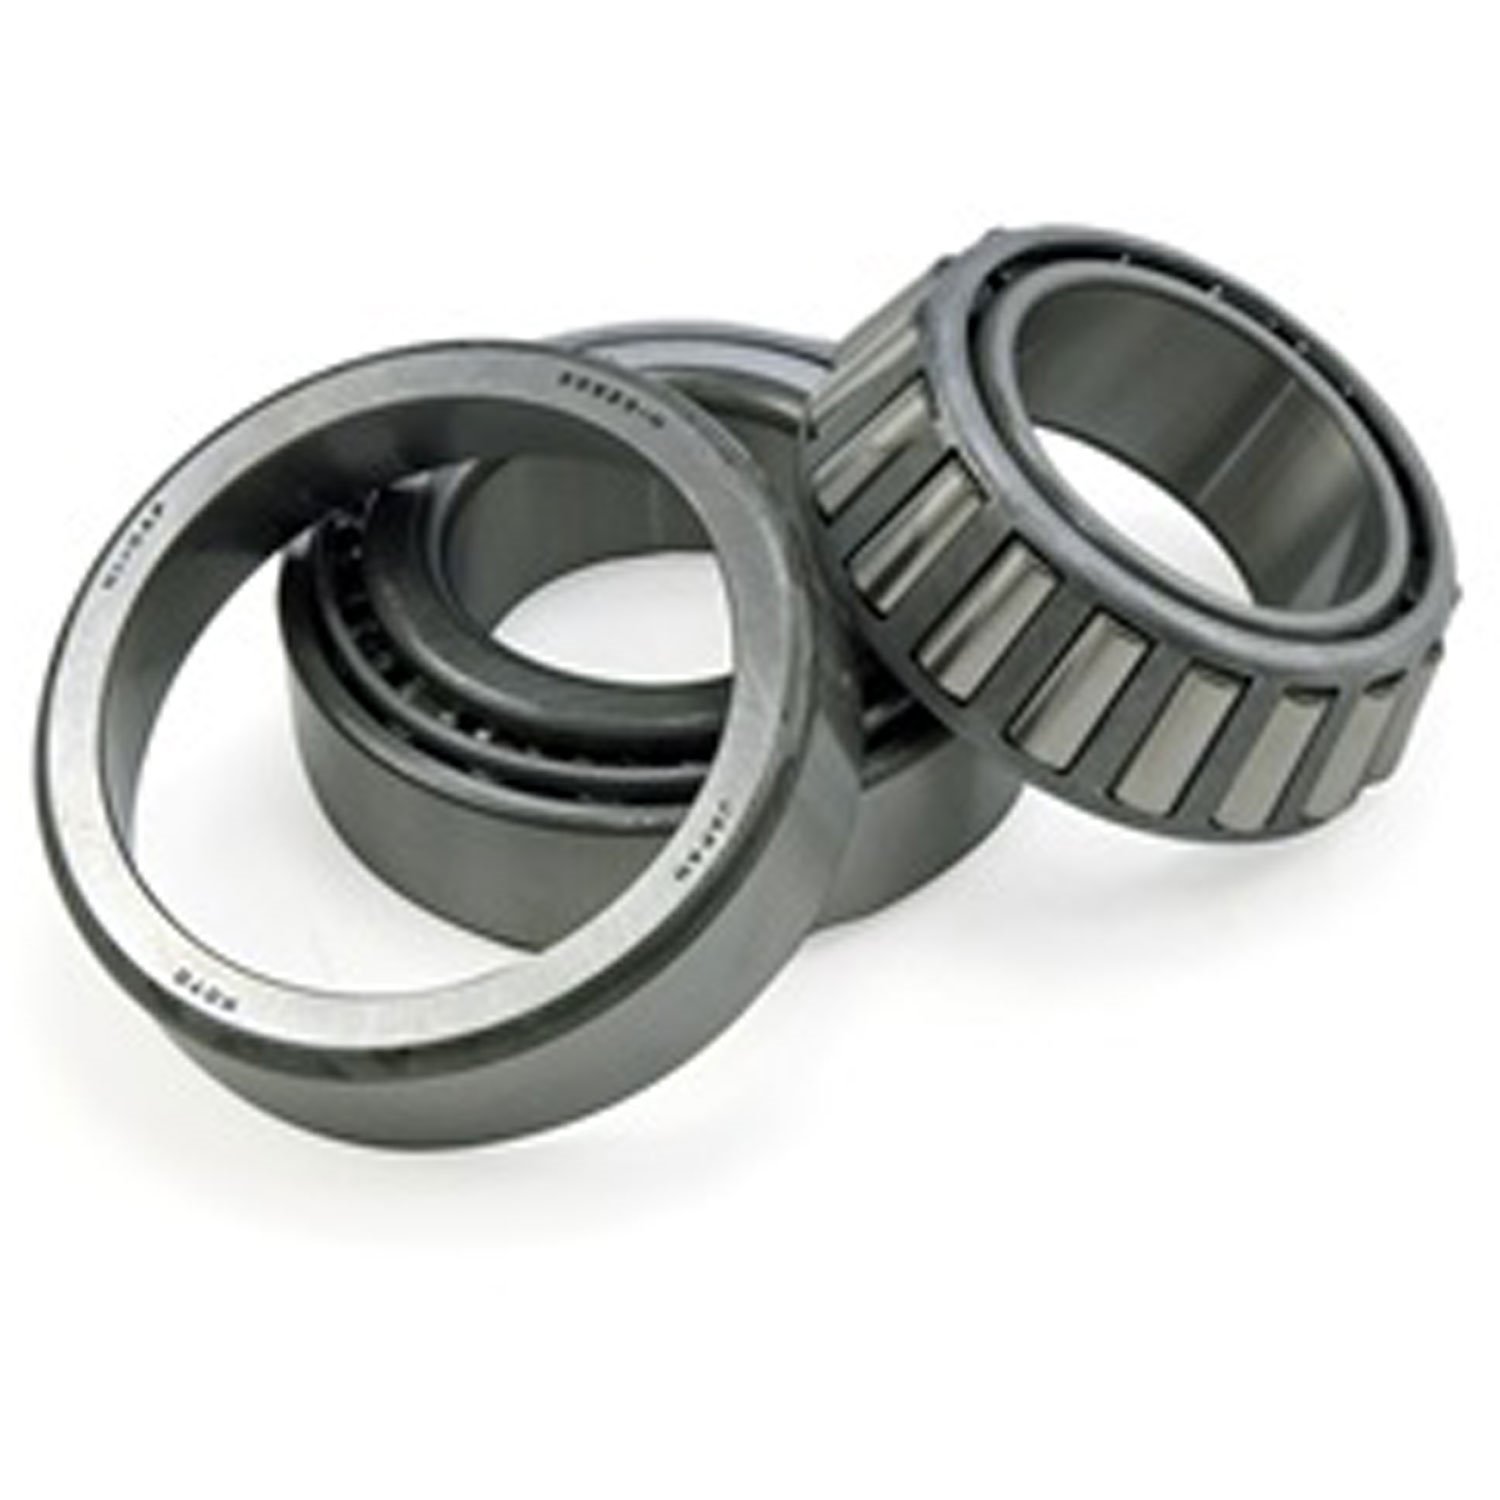 Differential Side Bearing Kit Rear for d44 Includes 2 Bearings and 2 Cups 72-1975 CJ5 72-1975 CJ6 19